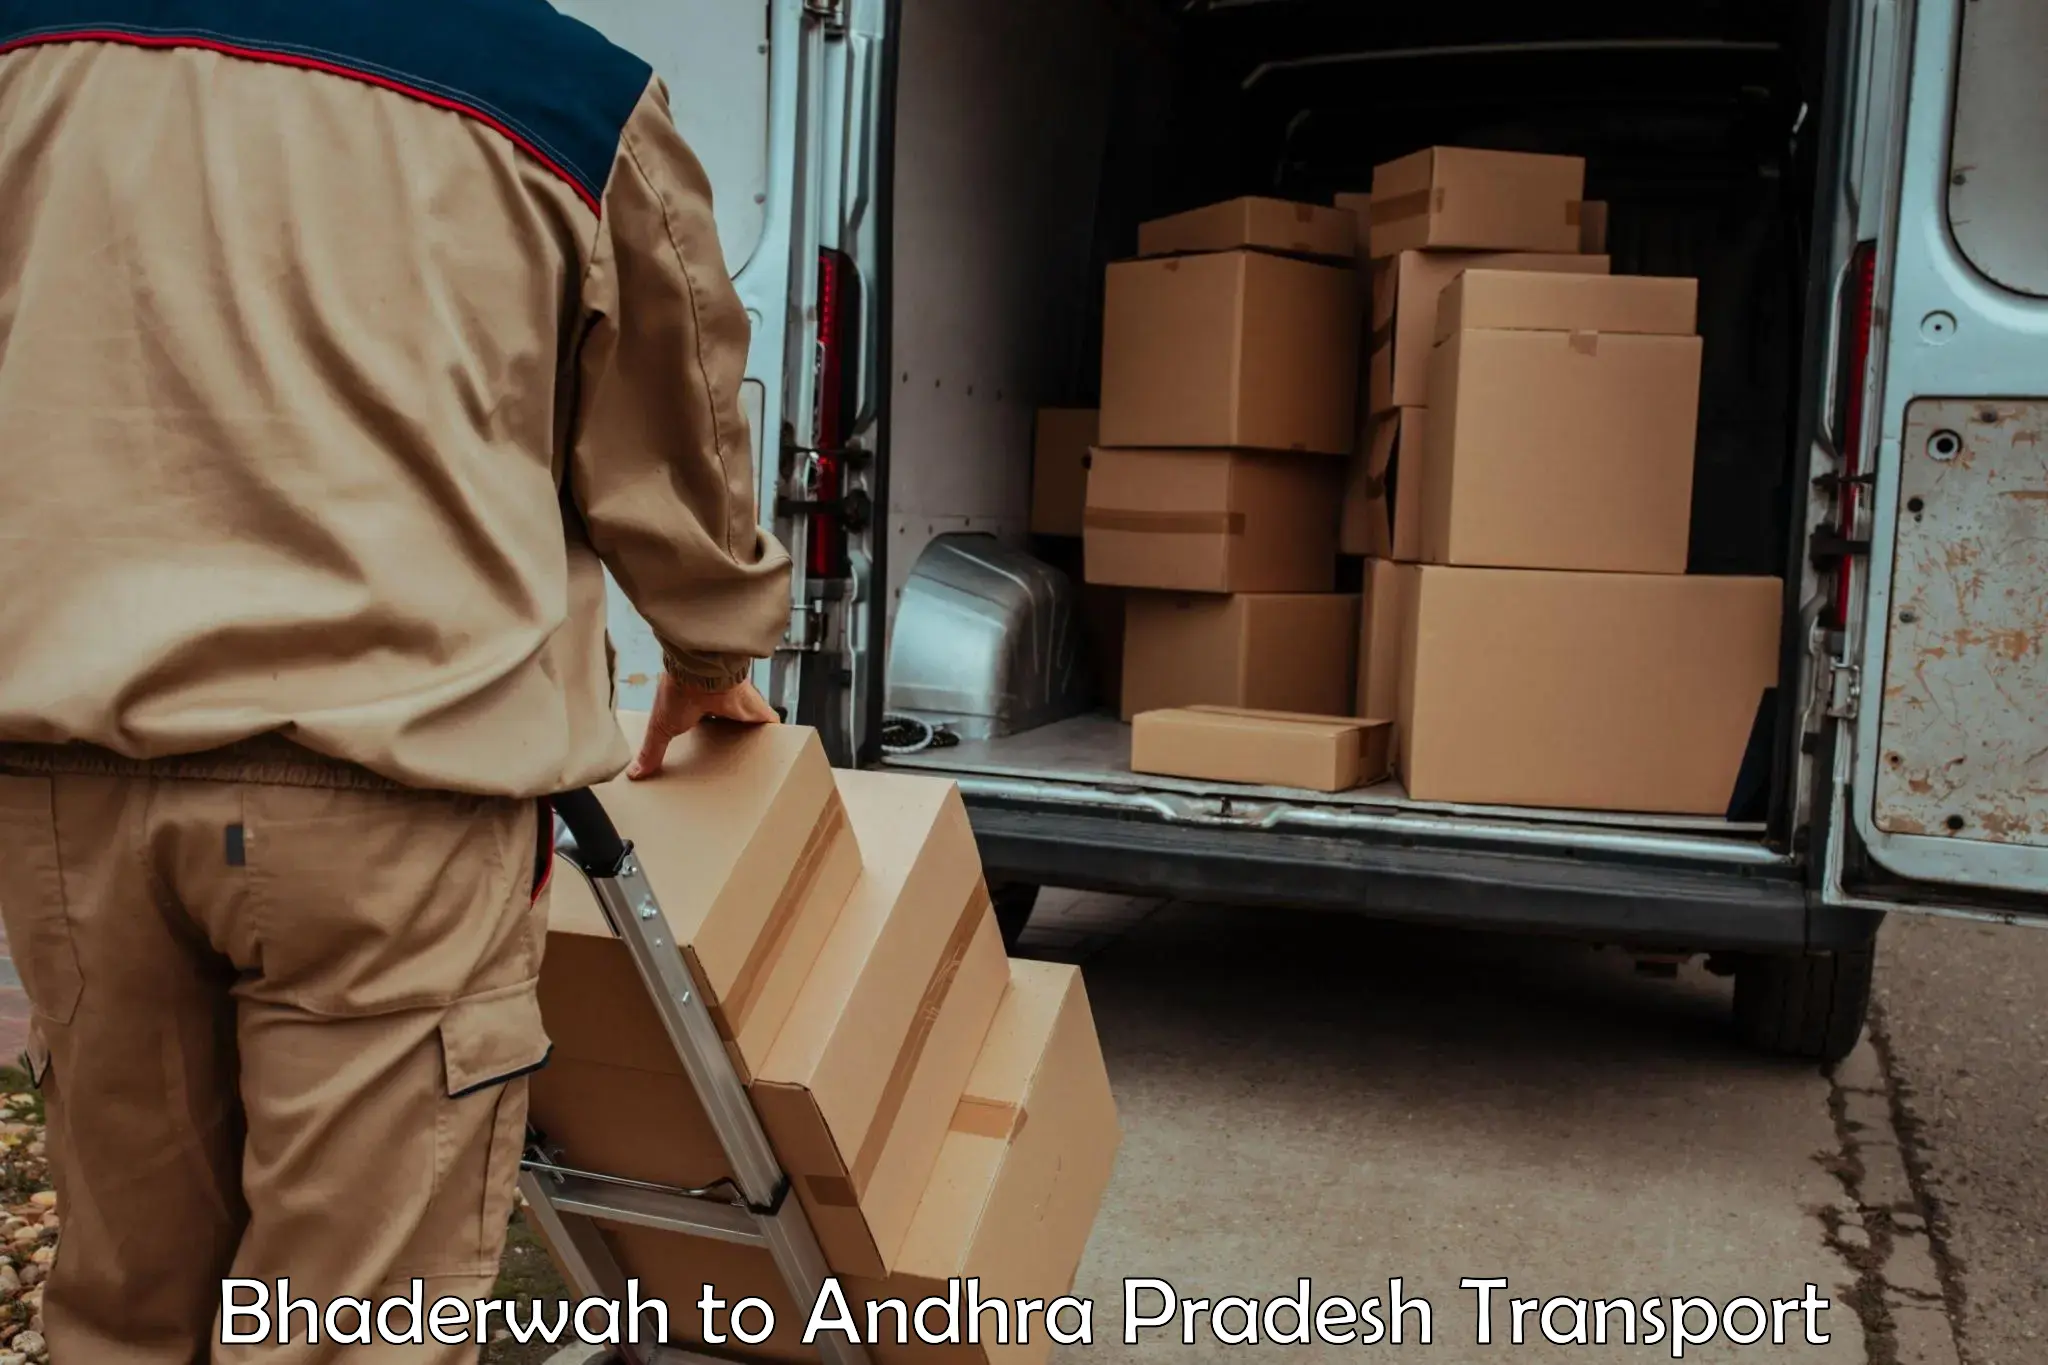 Container transportation services in Bhaderwah to Visakhapatnam Port